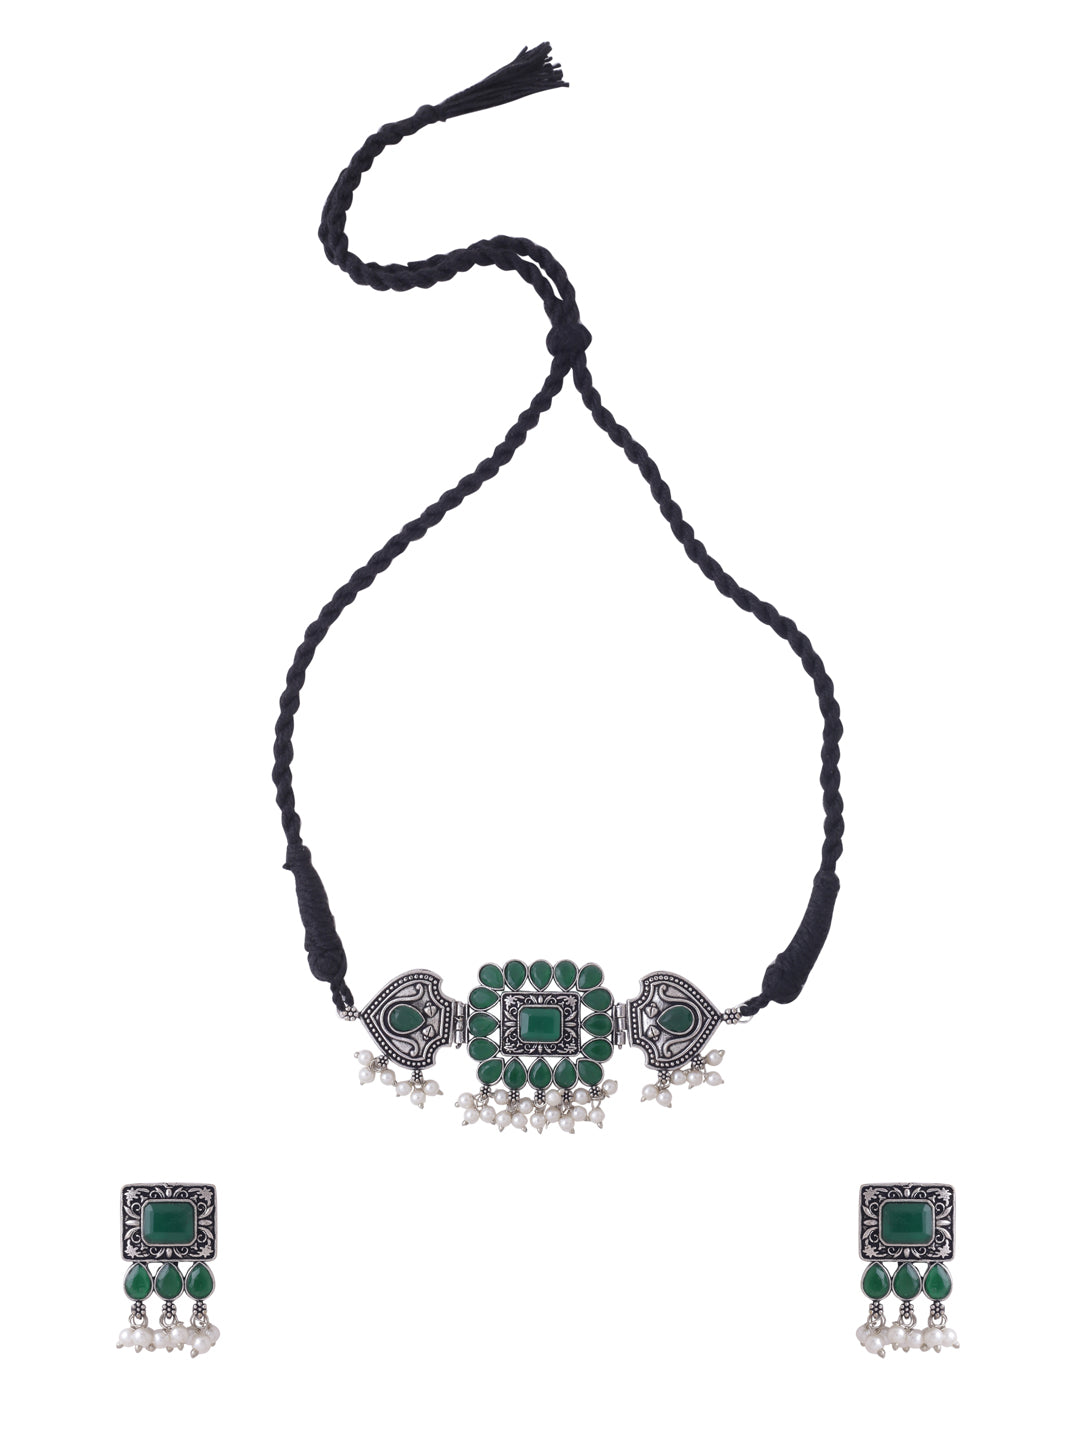 Women's Oxidised Silver Plated Green Color stone Jewellery Set with Earrings - NVR